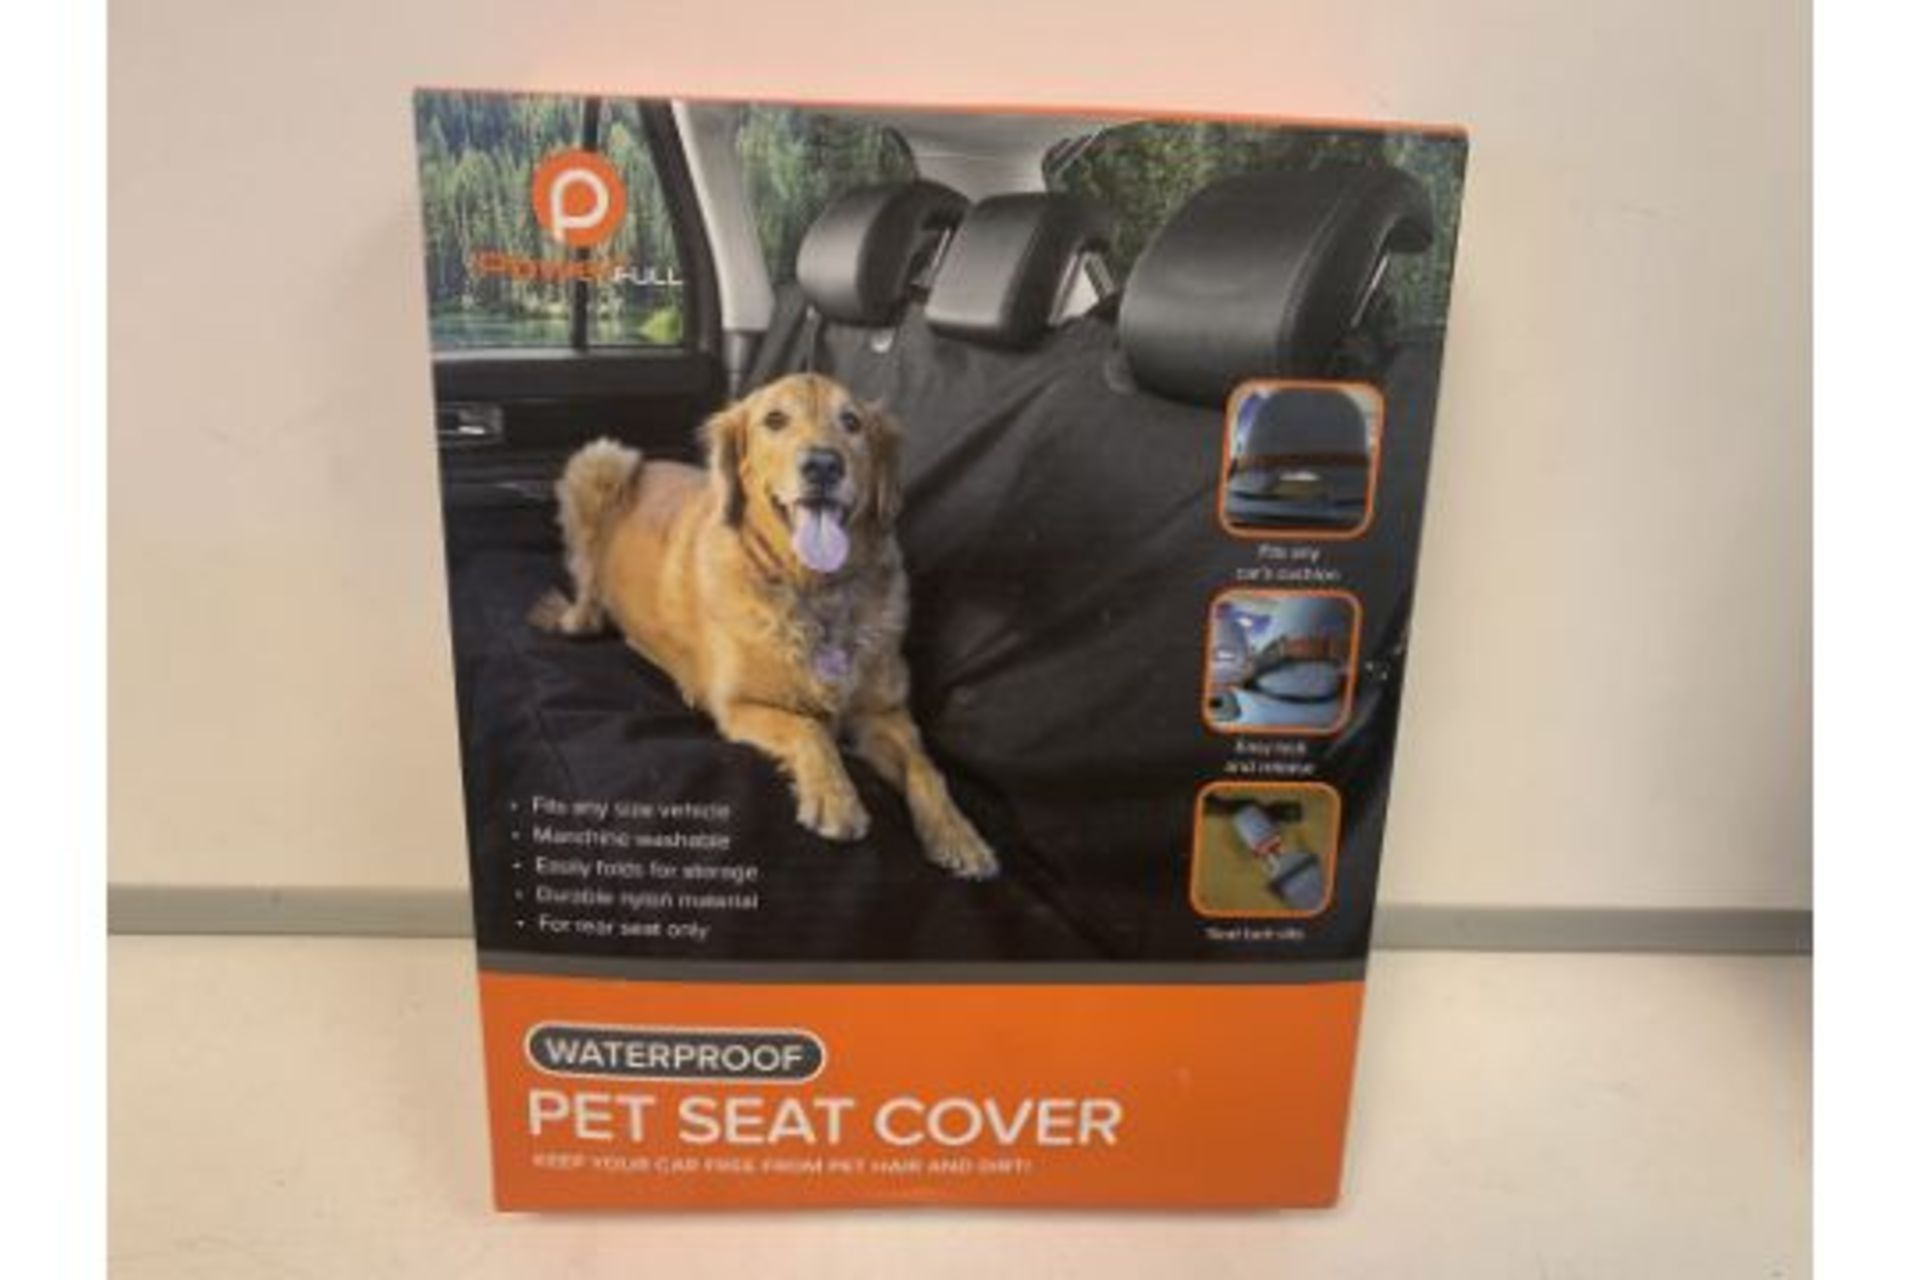 10 X NEW BOXED POWERFULL WATERPROOF PET SEAT COVERS. FITS SIZE VEHICLE. MACHINE WASHABLE. EASILY